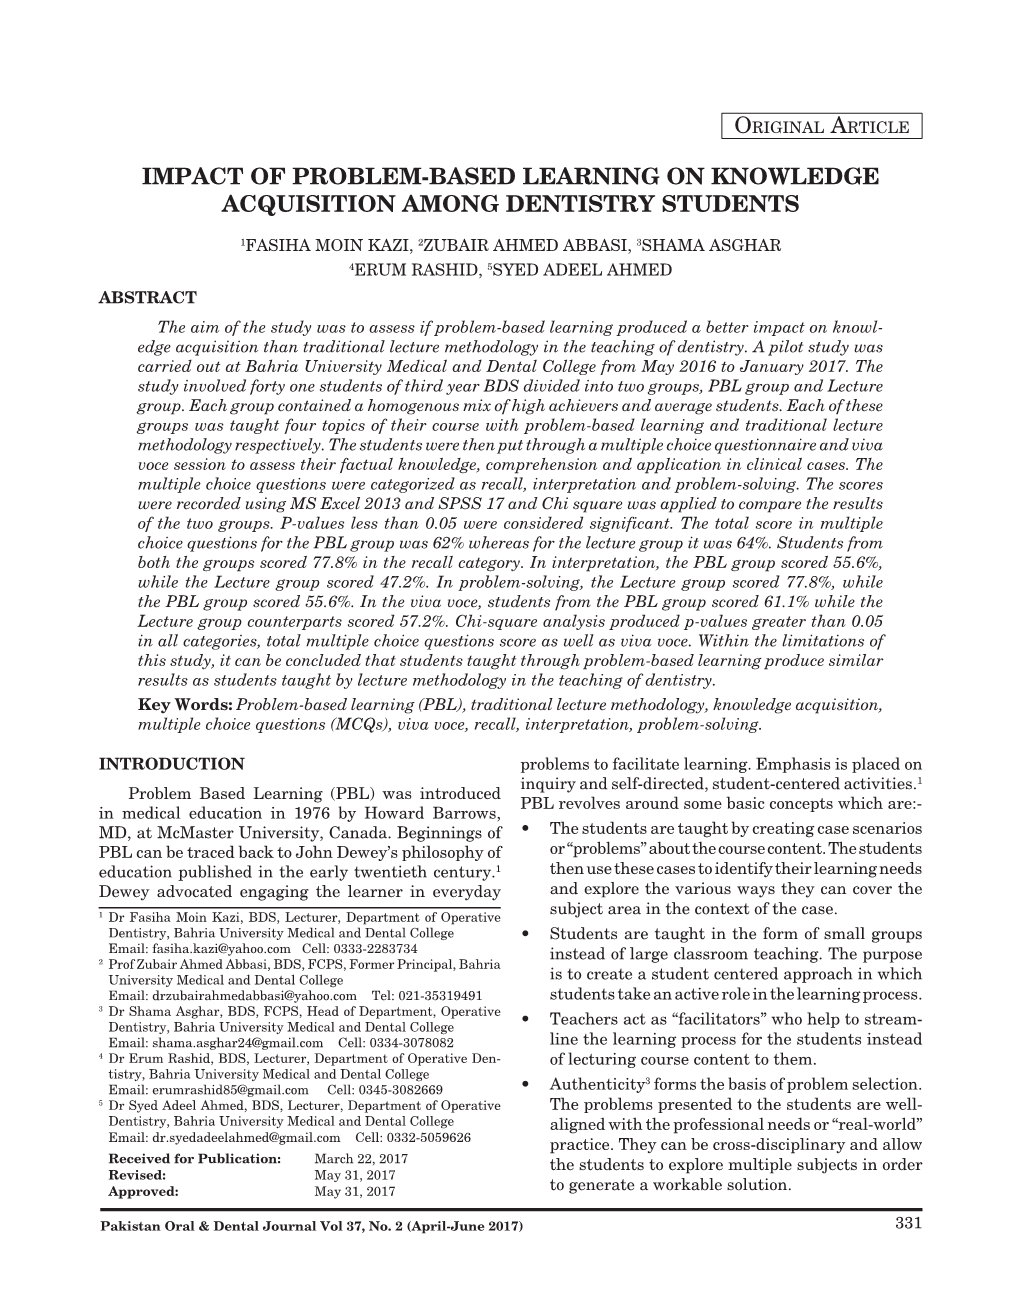 Impact of Problem-Based Learning on Knowledge Acquisition Among Dentistry Students